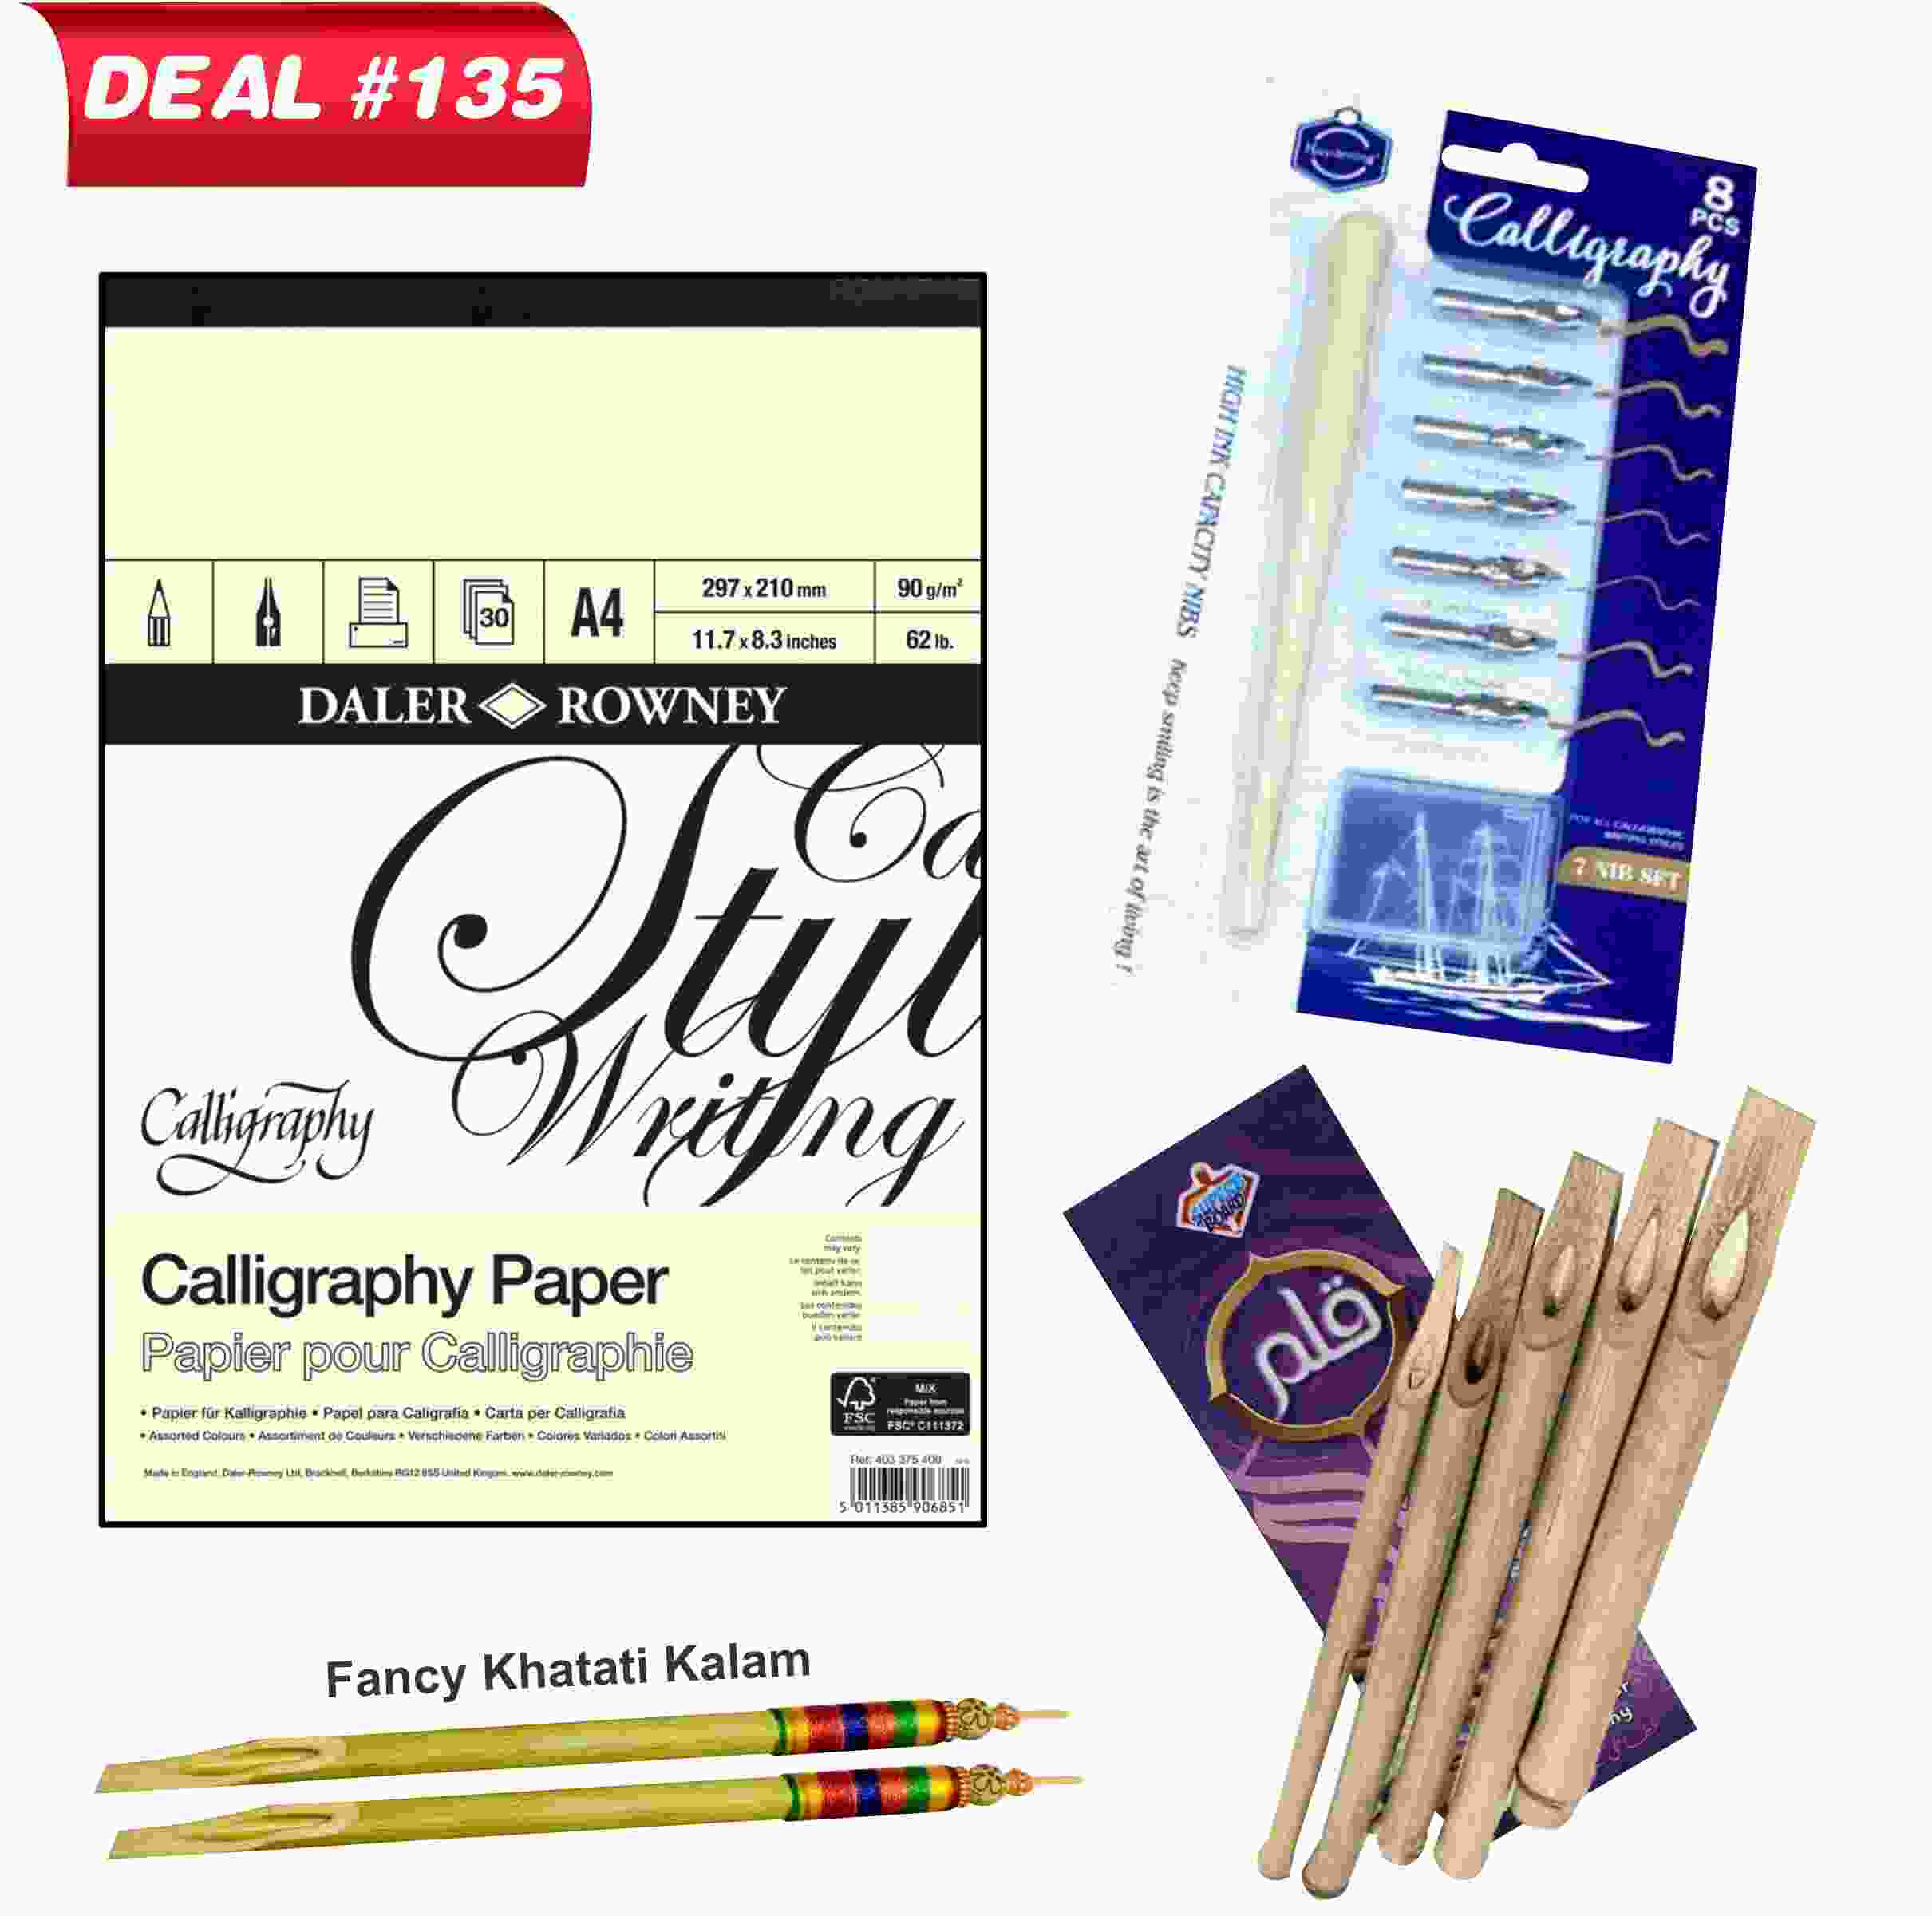 Calligraphy Painting Kit For Artist, Deal No.135